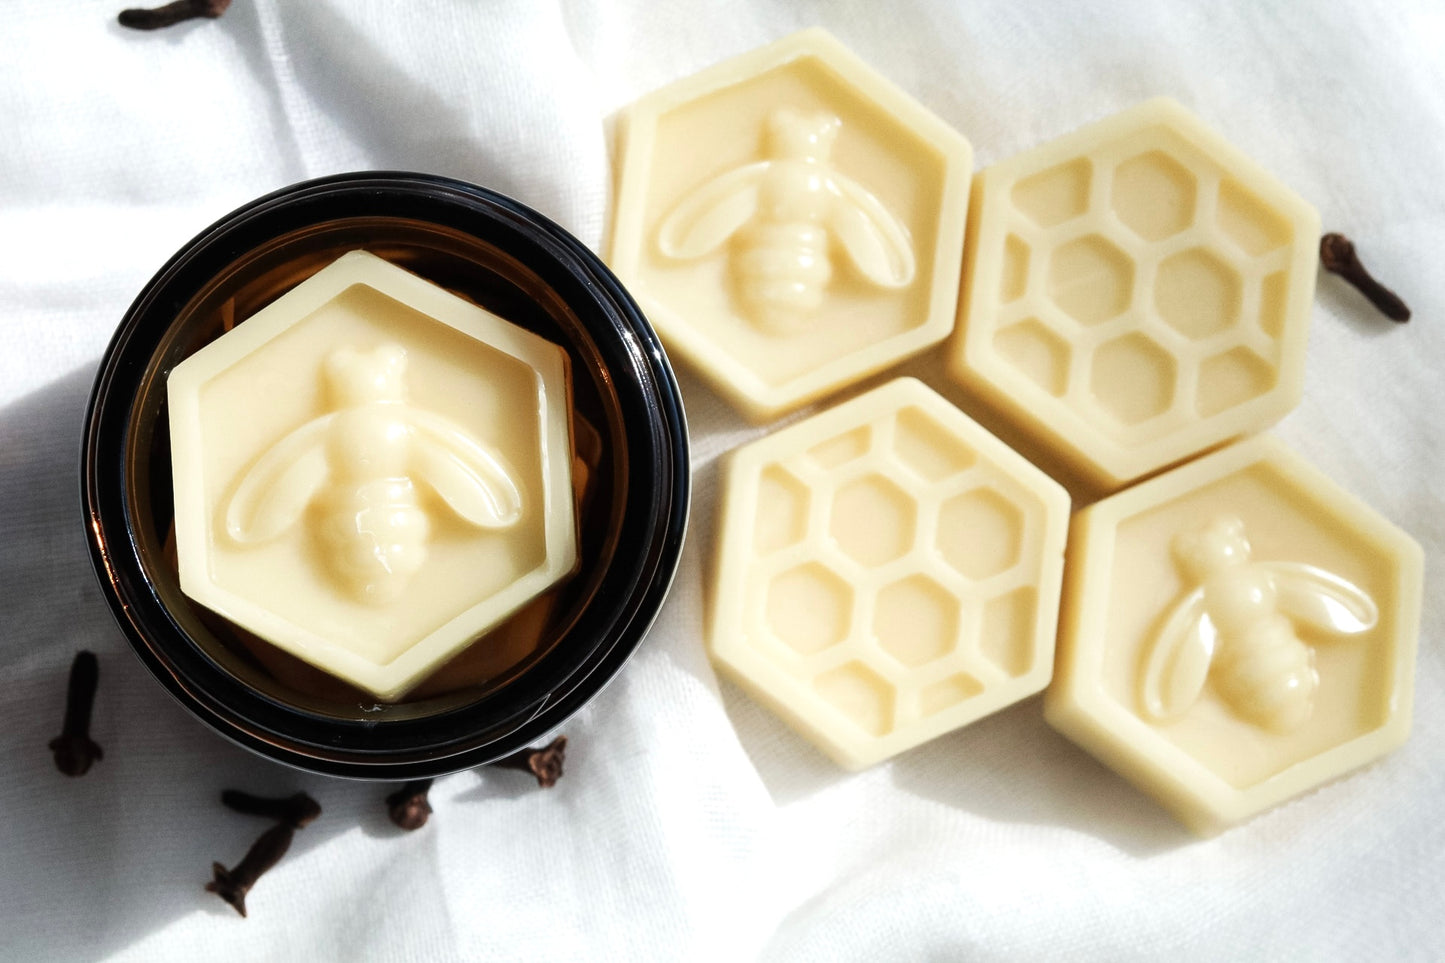 Rose Wax Melts with Essential Oils